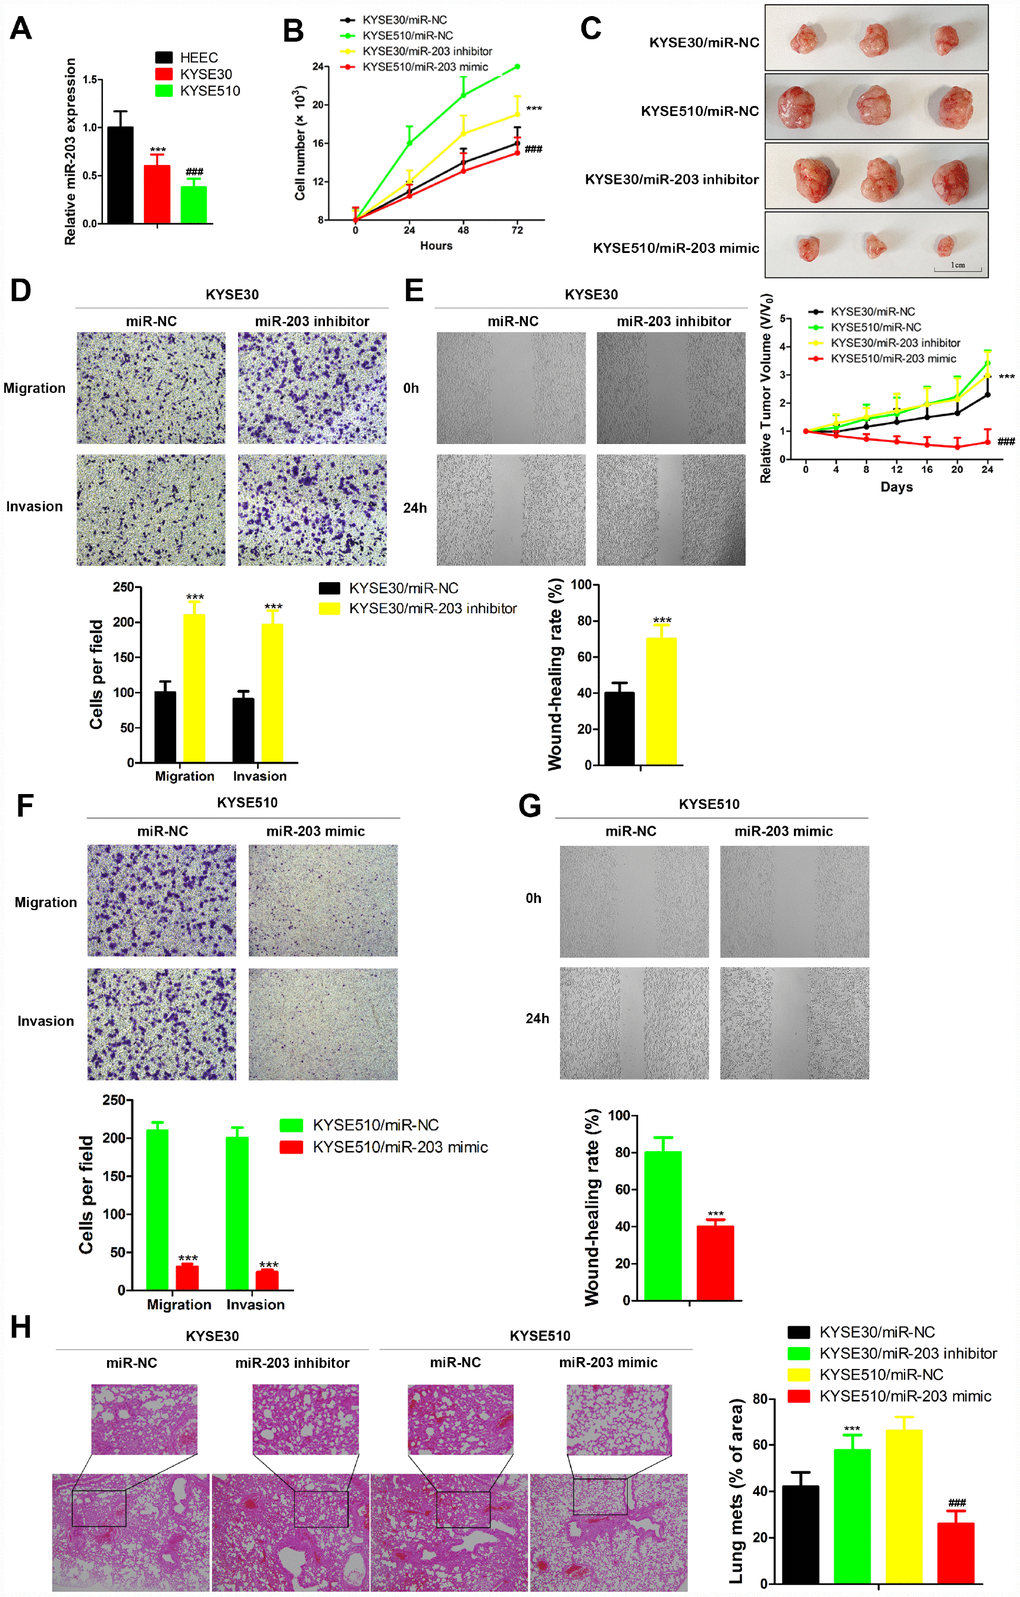 miR-203 inhibits proliferation, migration and invasion of EC cells in vivo and in vitro. (A) miR-203 expression in normal esophageal cell line HEEC and EC cell lines KYSE30 and KYSE510 was determined by qRT-PCR. Data is presented as mean ± SD from three independent experiments. ***p ###p B) Numbers of KYSE30 cells and KYSE510 cells were counted at indicated time post transfected with miR-203 inhibitor, miR-203 mimic or miR-203 negative control (miR-NC). Data is presented as mean ± SD from three independent experiments. ***p###pC) Tumor volume changes of mice with different genetically modified cells. Data are presented as mean ± SD (n=10). ***p###pD) and wound healing assay (E). Cellular migration and invasion of KYSE510 cells were evaluated by transwell assays (F) and wound healing assay (G). Quantification of the numbers of migrating or invading cells is presented as mean ± SD from three independent experiments (×100). ***pH) The changes of lung metastasis of different genetically modified cells. Data is presented as mean ± SD from three independent experiments (×100). ***p###p